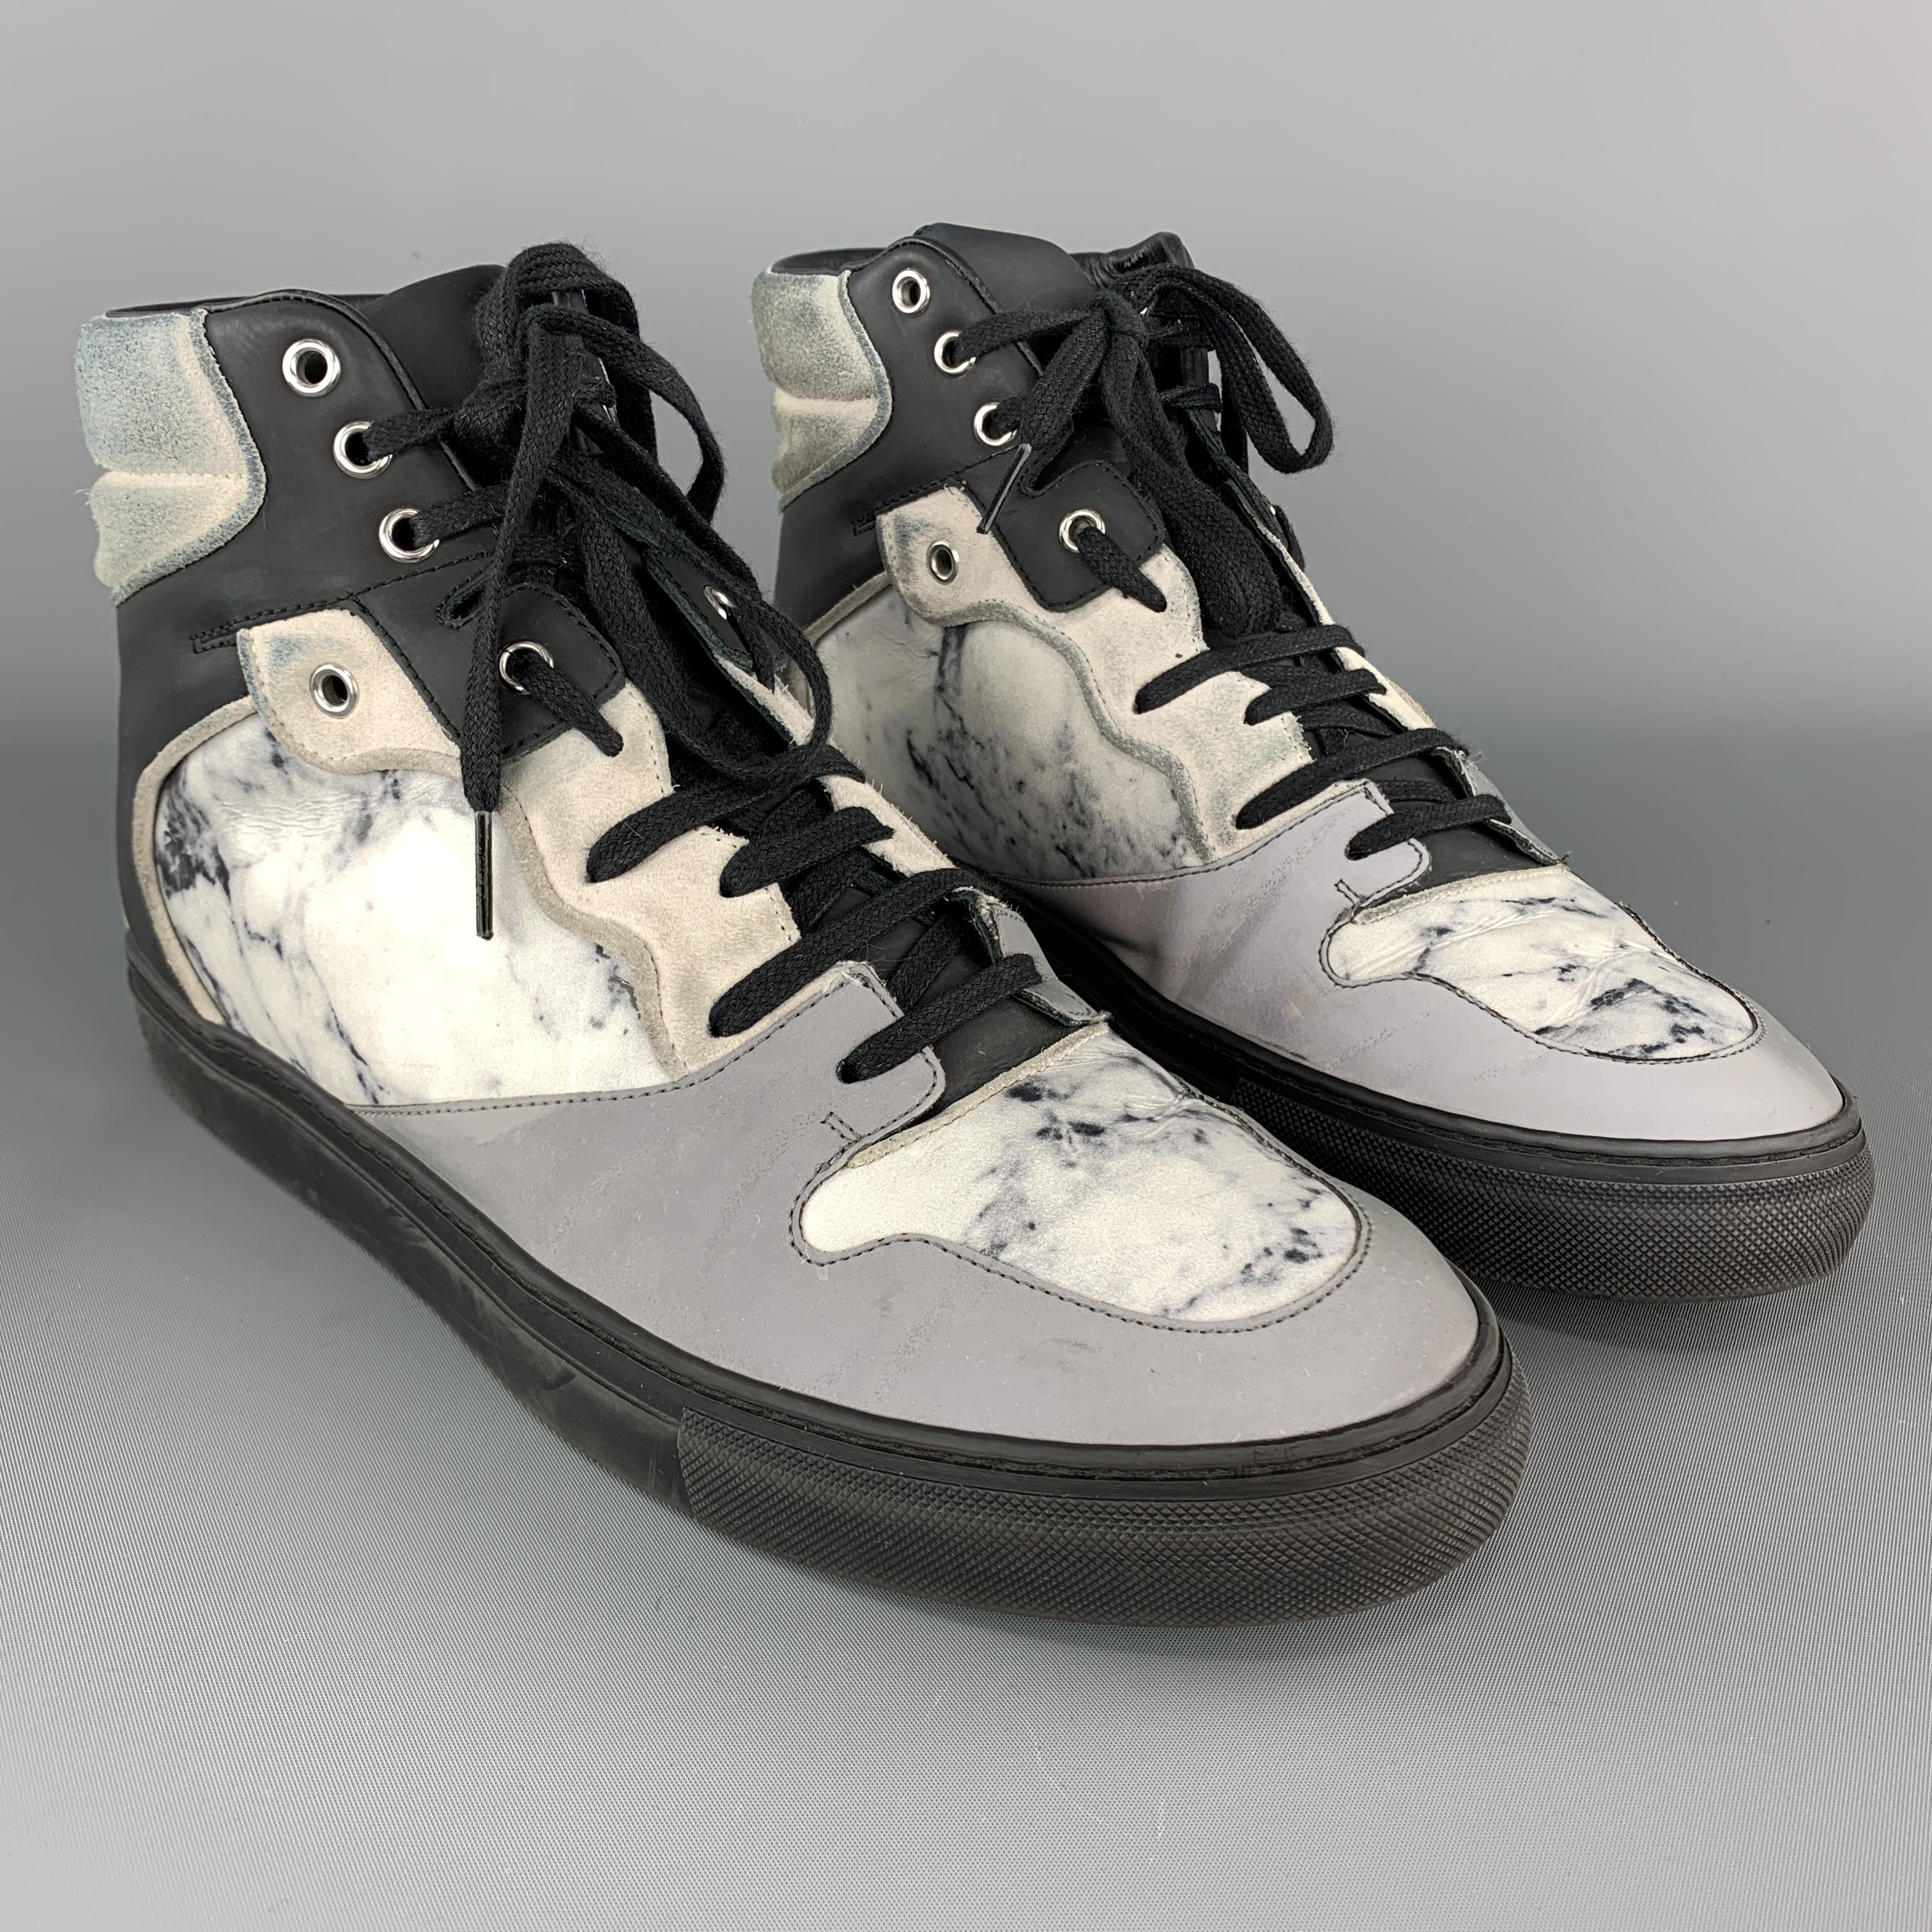 BALENCIAGA high top sneakers come in white marble print leather with cream suede panels, black rubber panels, and reflective front. Wear and discolorations throughout. As-is. Made in Italy.

Fair Pre-Owned Condition.
Marked: IT 43

Outsole: 12 x 4